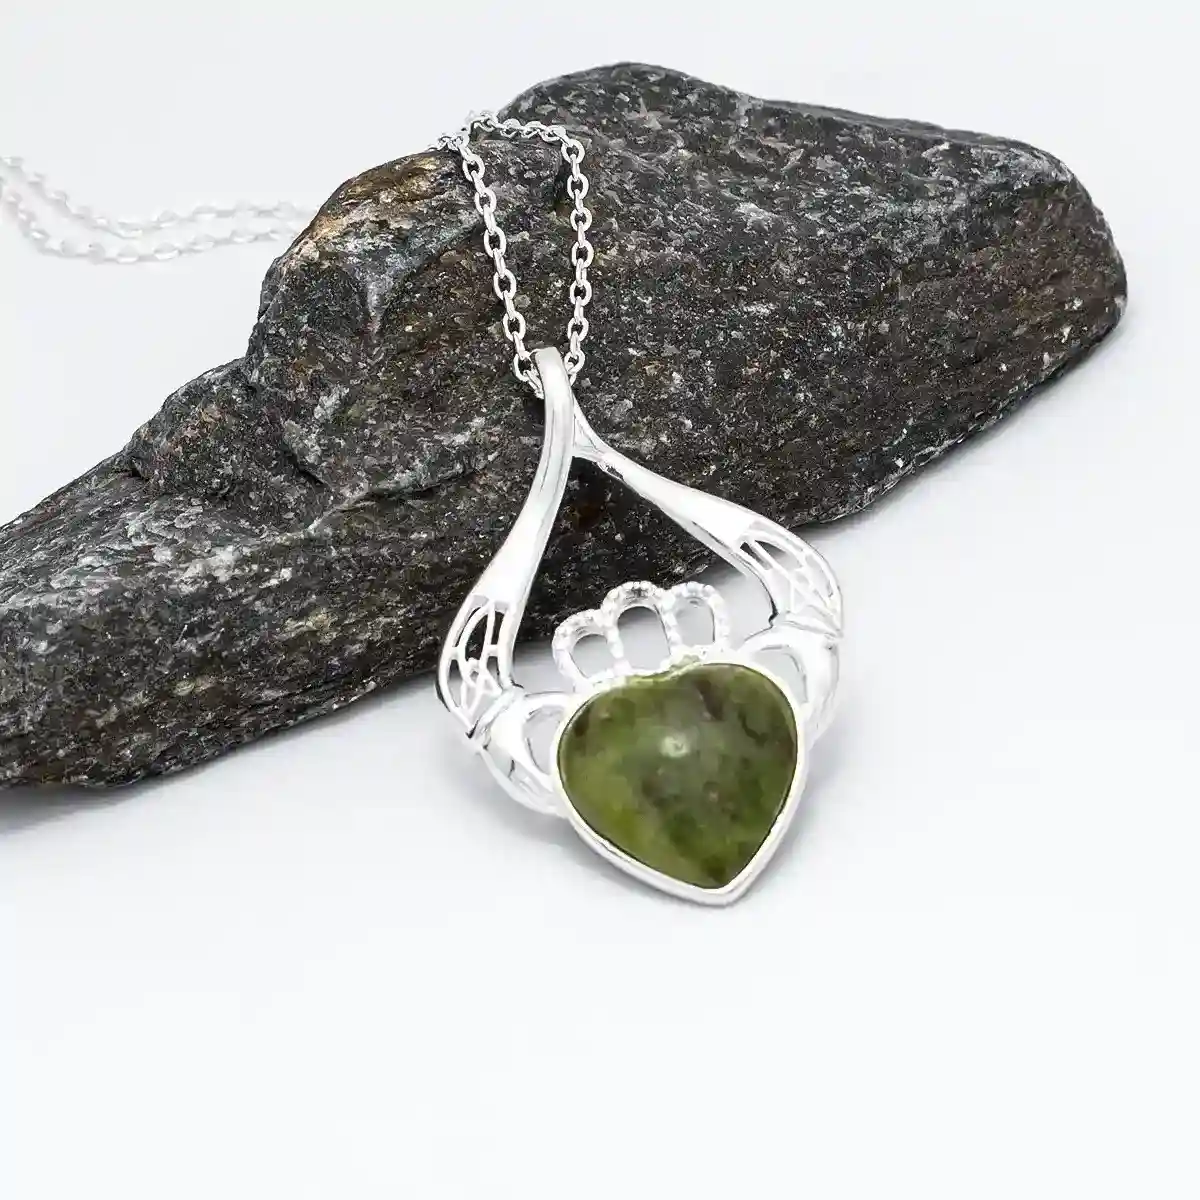 1 Ijc Connemara Marble Necklace Sterling Silver...